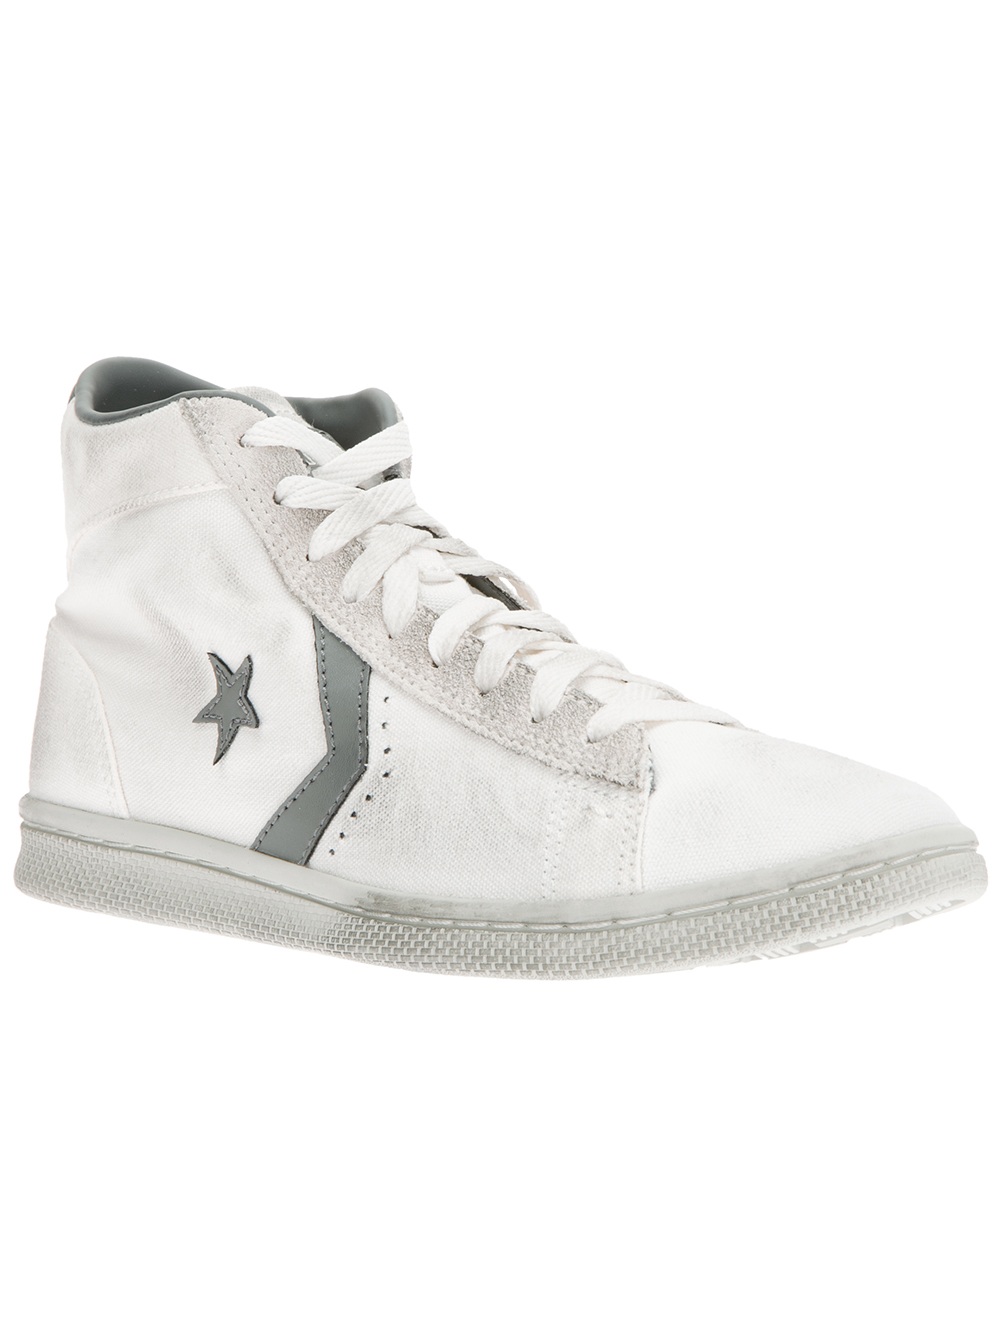 converse pro leather lp mid leather